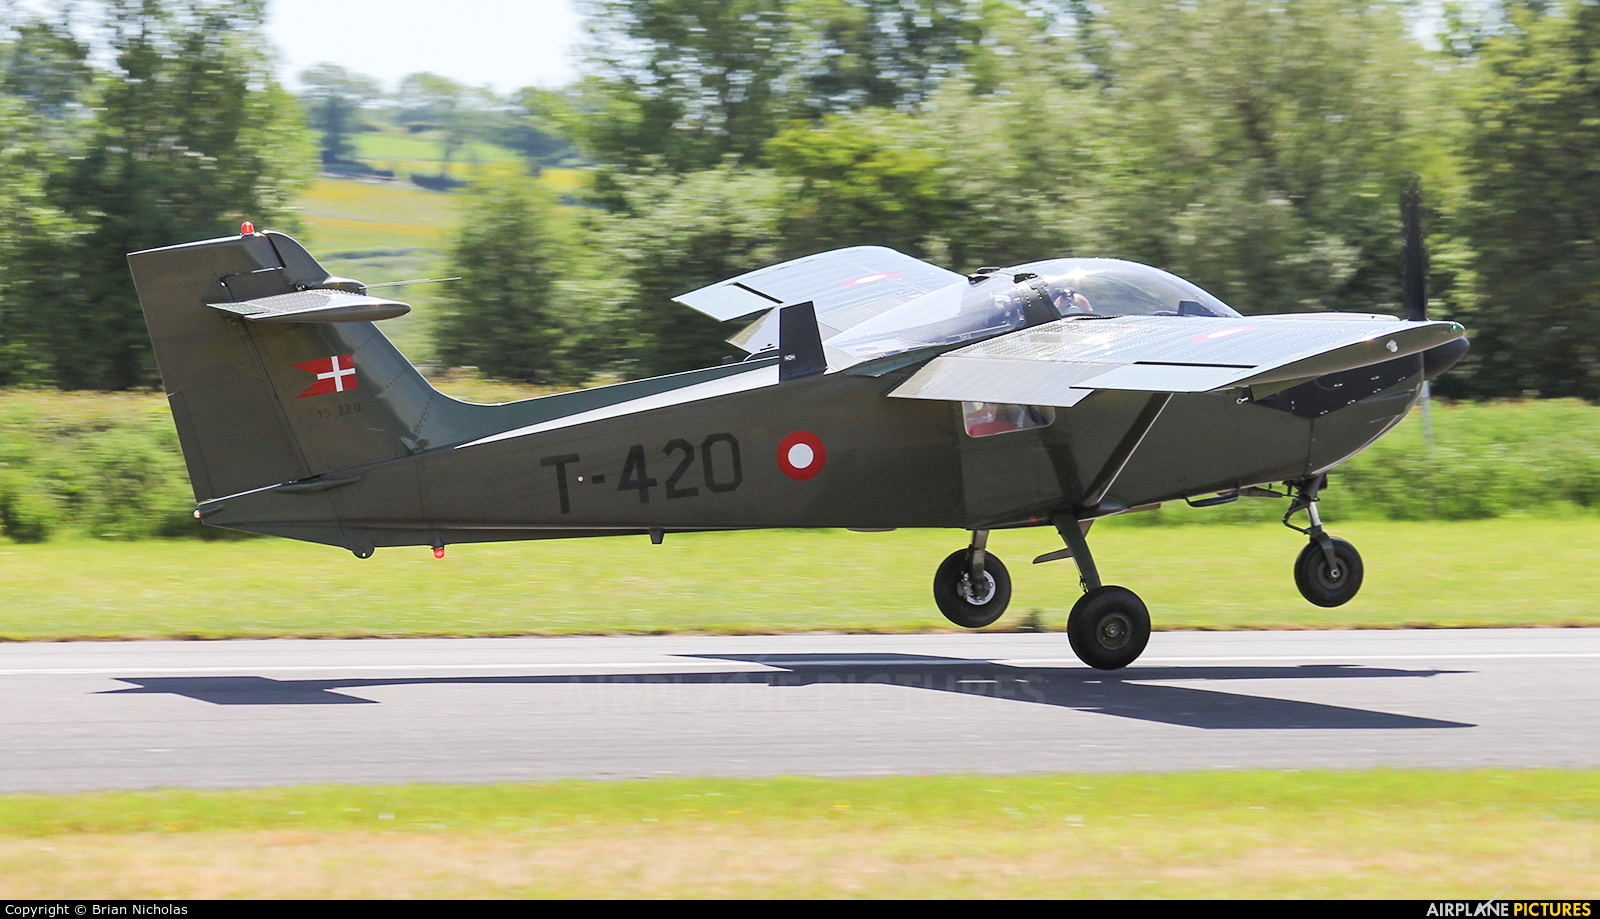 Denmark - Air Force T-420 aircraft at Welshpool